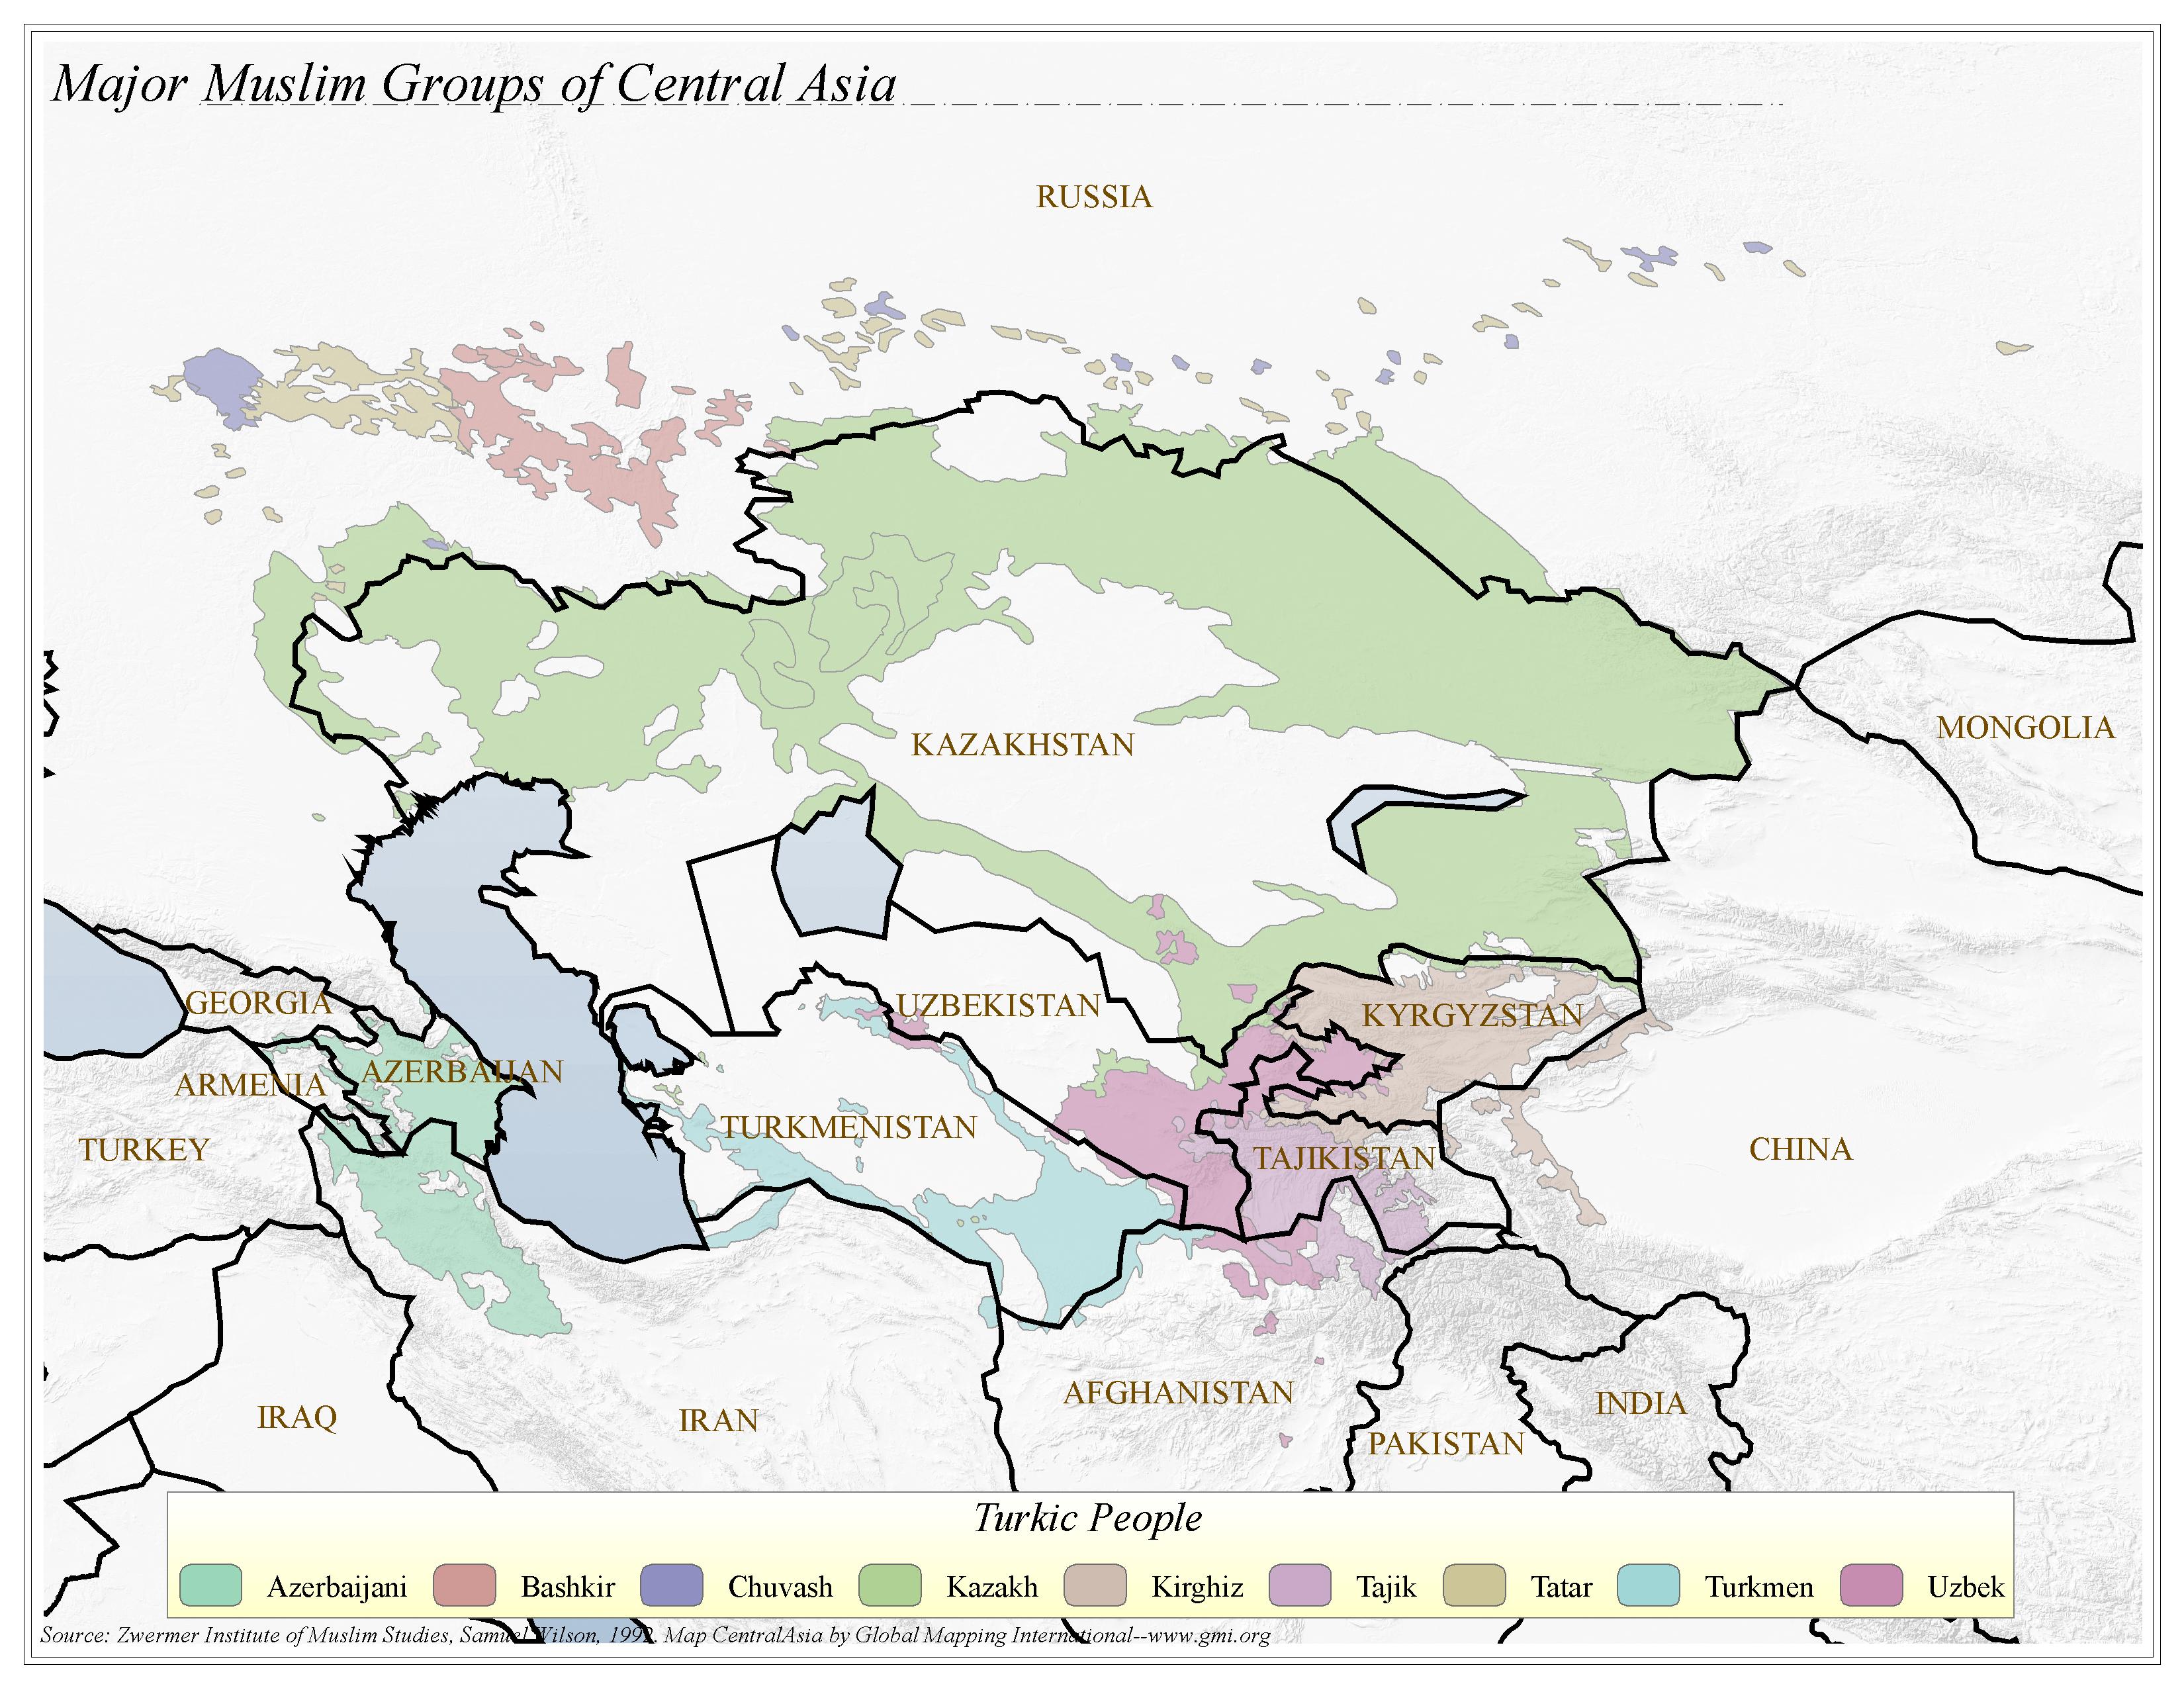 Major Muslim Groups of Central Asia